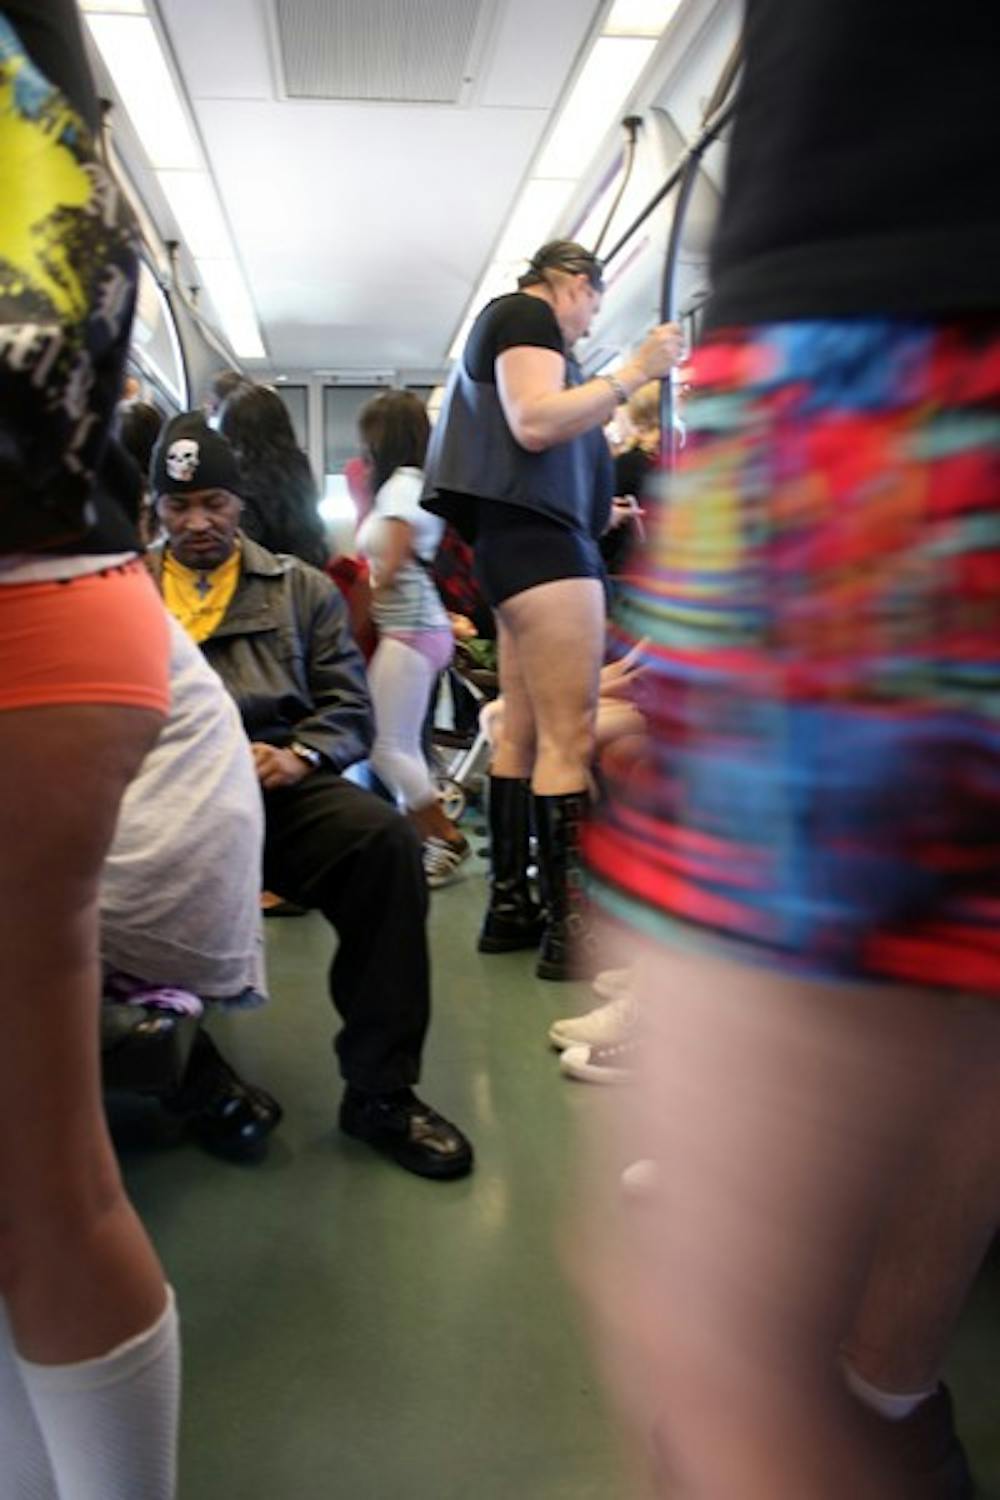 More than 400 Valley residents participated in the fourth annual No Pants AZ Light Rail Ride Sunday afternoon.  The ride began both ends of the Metro Light Rail and ended on Mill Avenue for drinks at Robbie Fox's Public House.  (Photo by Shawn Raymundo)